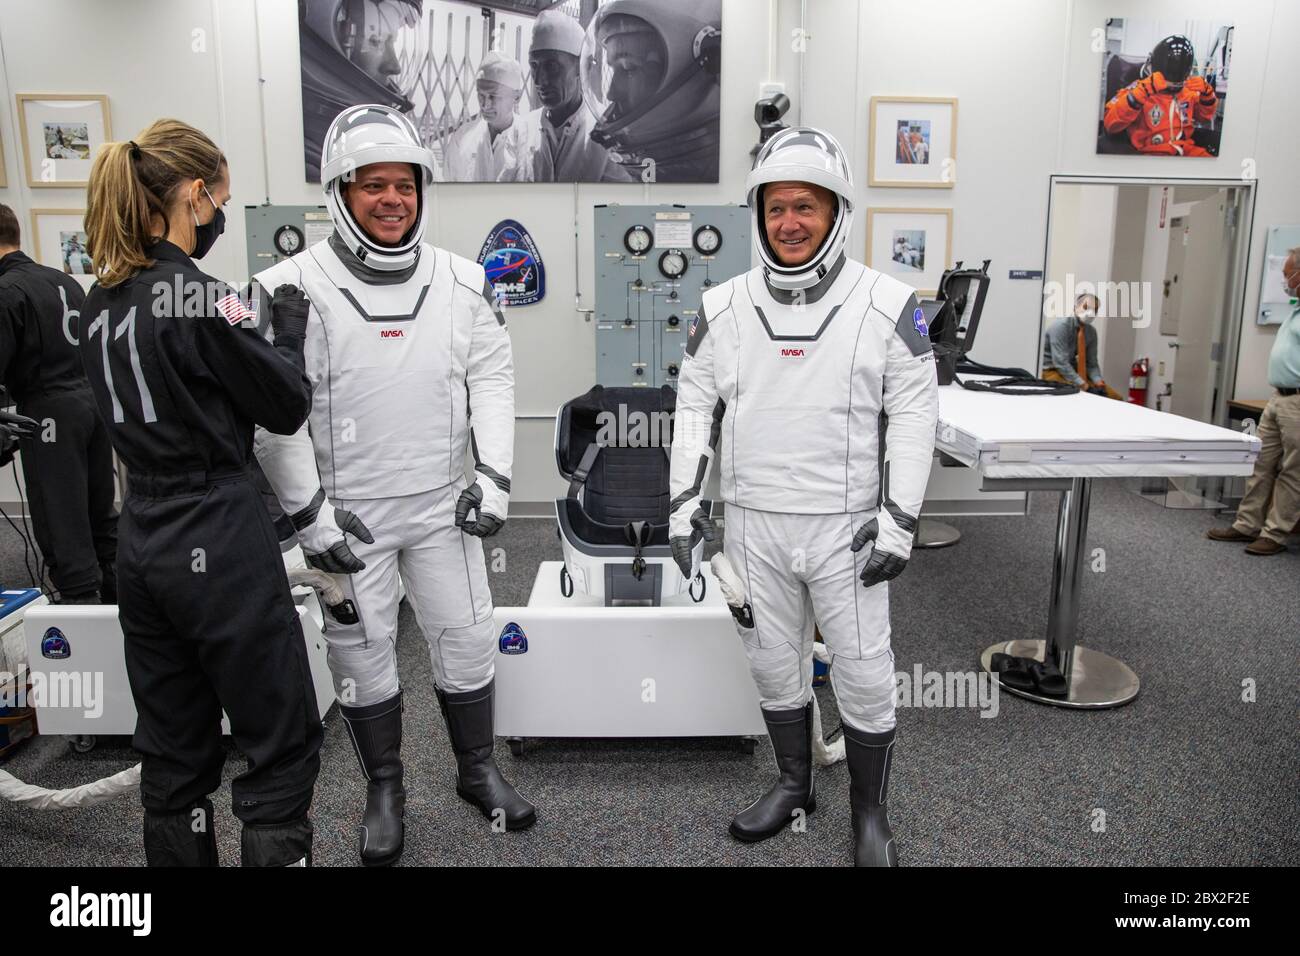 NASA astronauts Robert Behnken, left, and Douglas Hurley, right, are assisted with donning their SpaceX spacesuits, in the ready room of the Neil Armstrong Operations and Checkout Building to Launch Complex 39A for the Demo-2 mission launch at the Kennedy Space Center May 30, 2020 Cape Canaveral, in Florida. The astronauts will make a second attempt at launch in the first commercial launch carrying astronauts to the International Space Station. Stock Photo